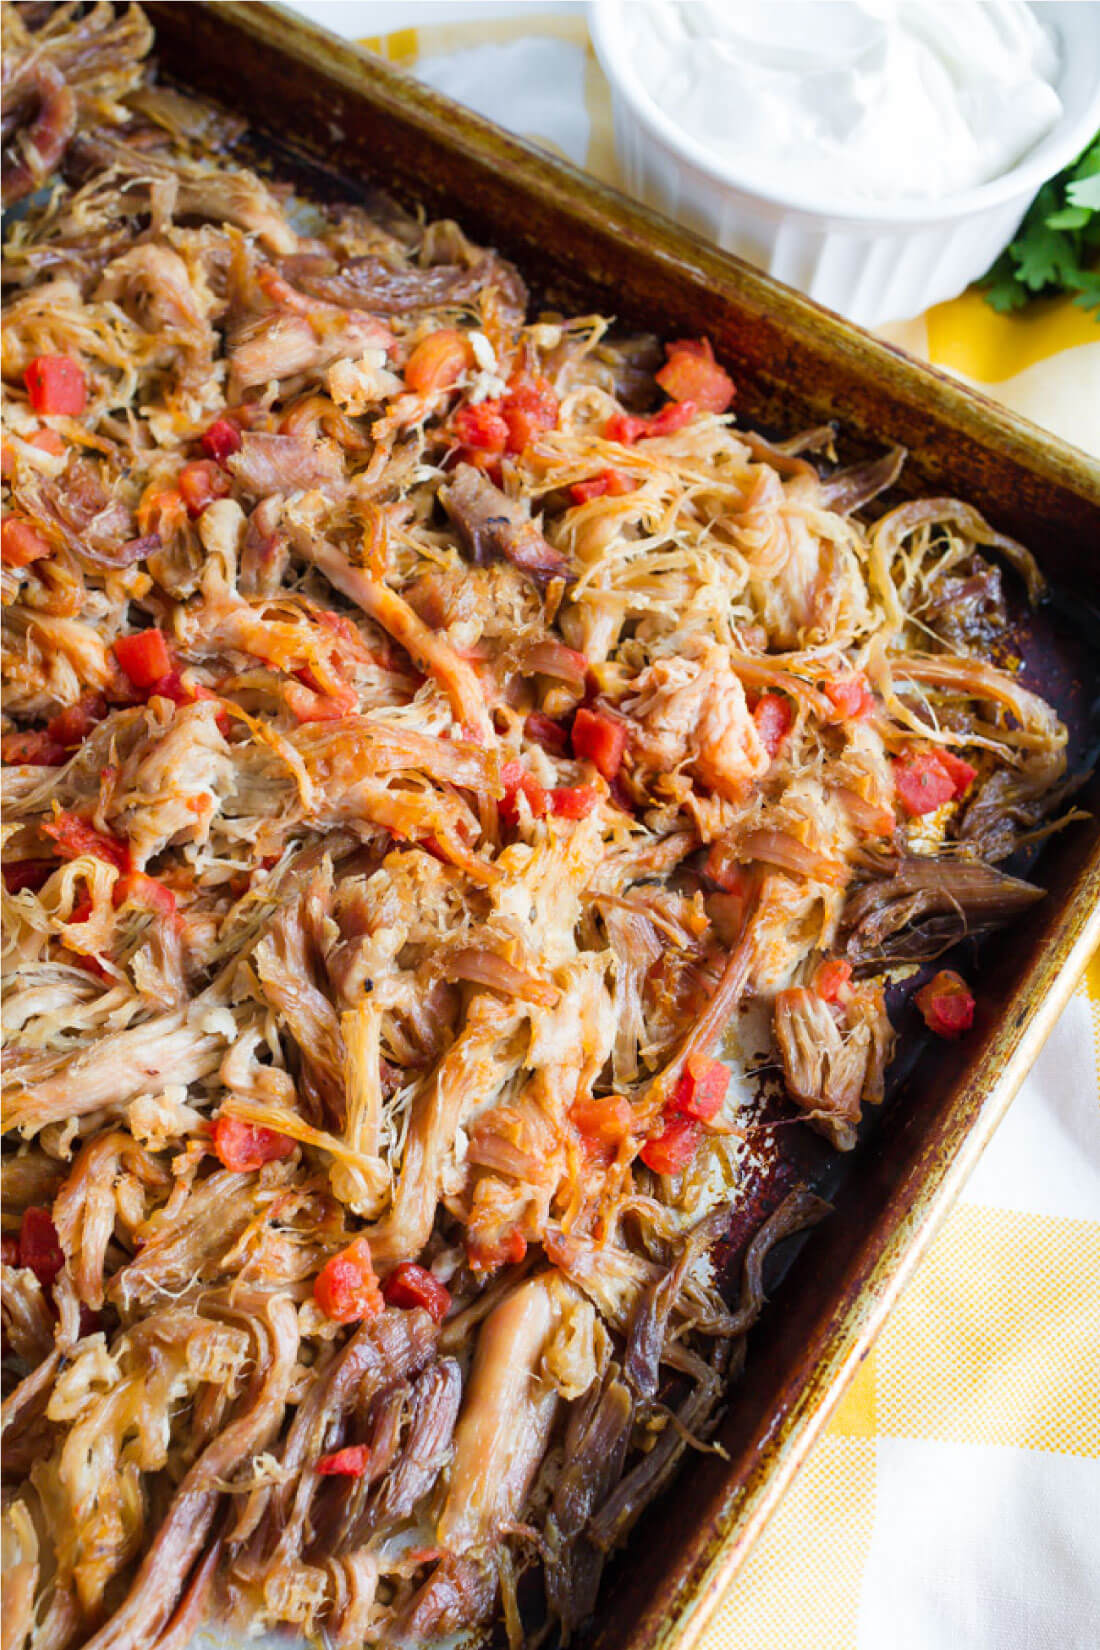 Full of flavor with a little spice, this Pork Carnitas recipe is a tasty Mexican favorite.